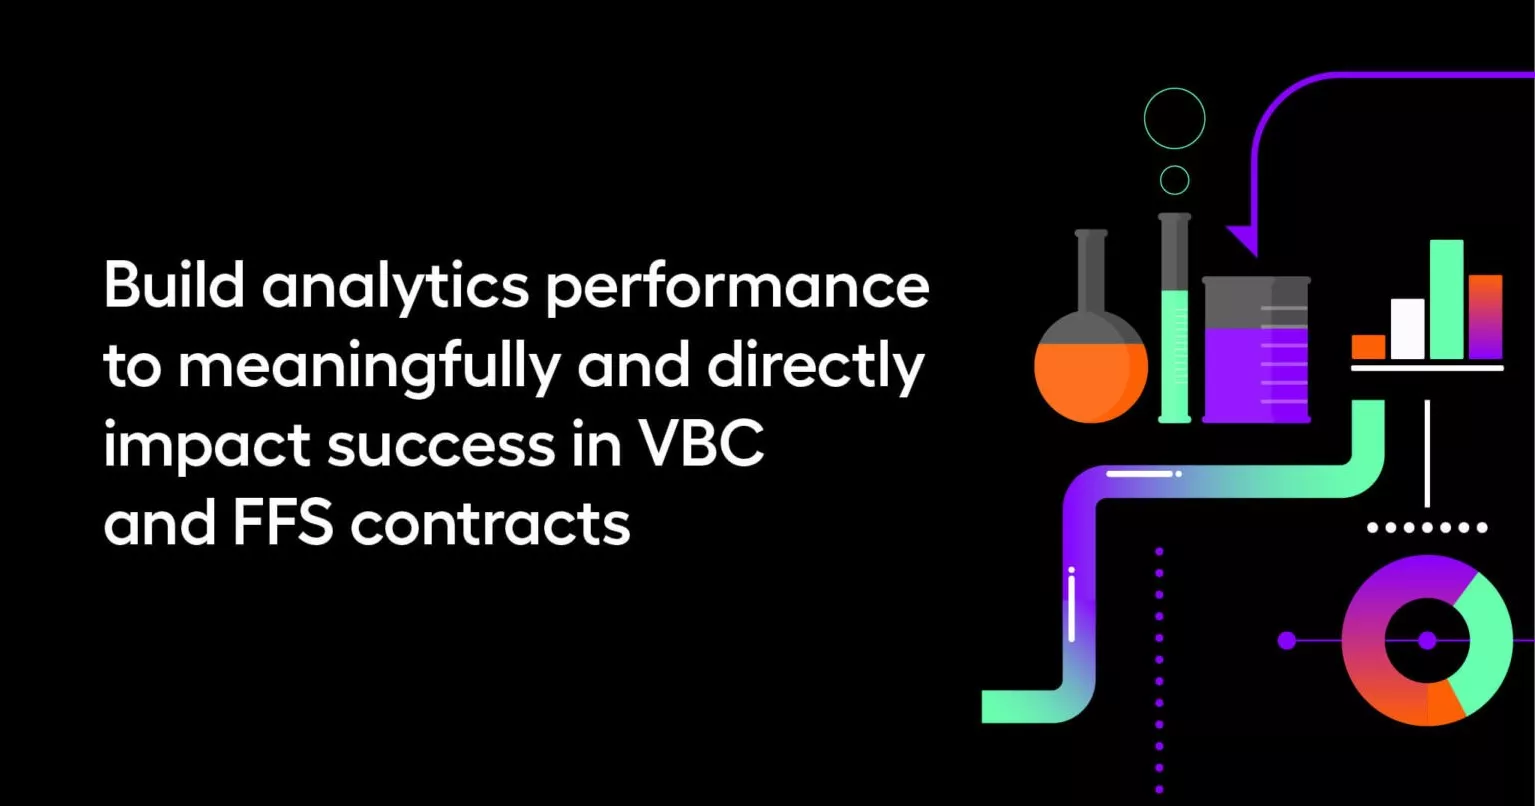 Build analytics performance to meaningfully and directly impact success in VBC and FFS contracts